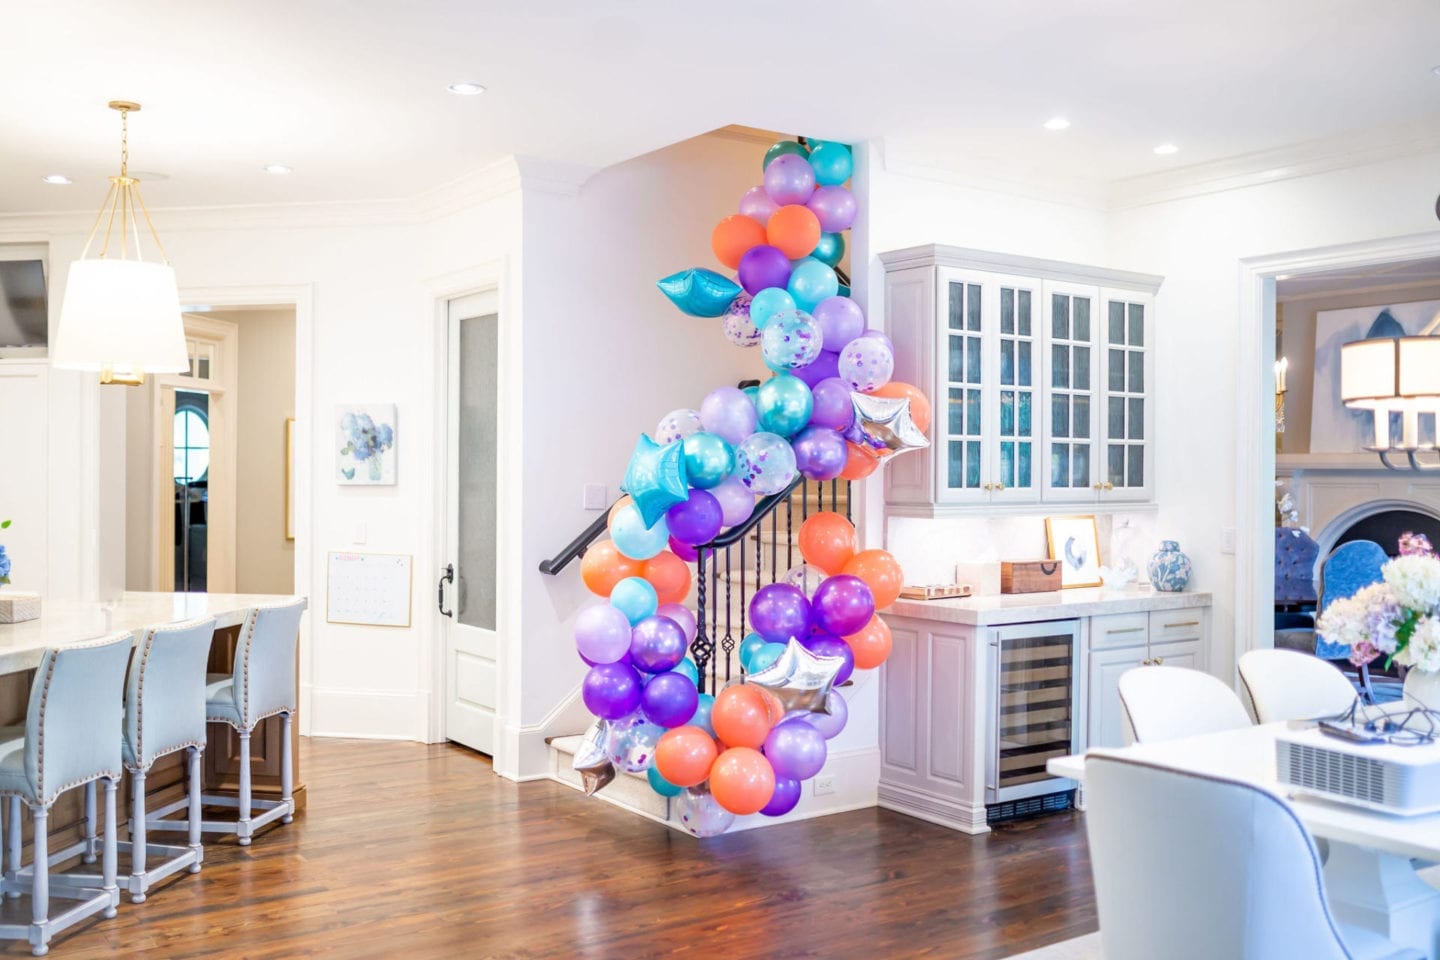 We threw a COVID surprise party for our daughter. To make it special we had awesome party balloon decorations! Sharing some fun balloon decoration ideas! I've linked everything used here for the balloon garland kit and a DIY balloon garland fun-filled party!